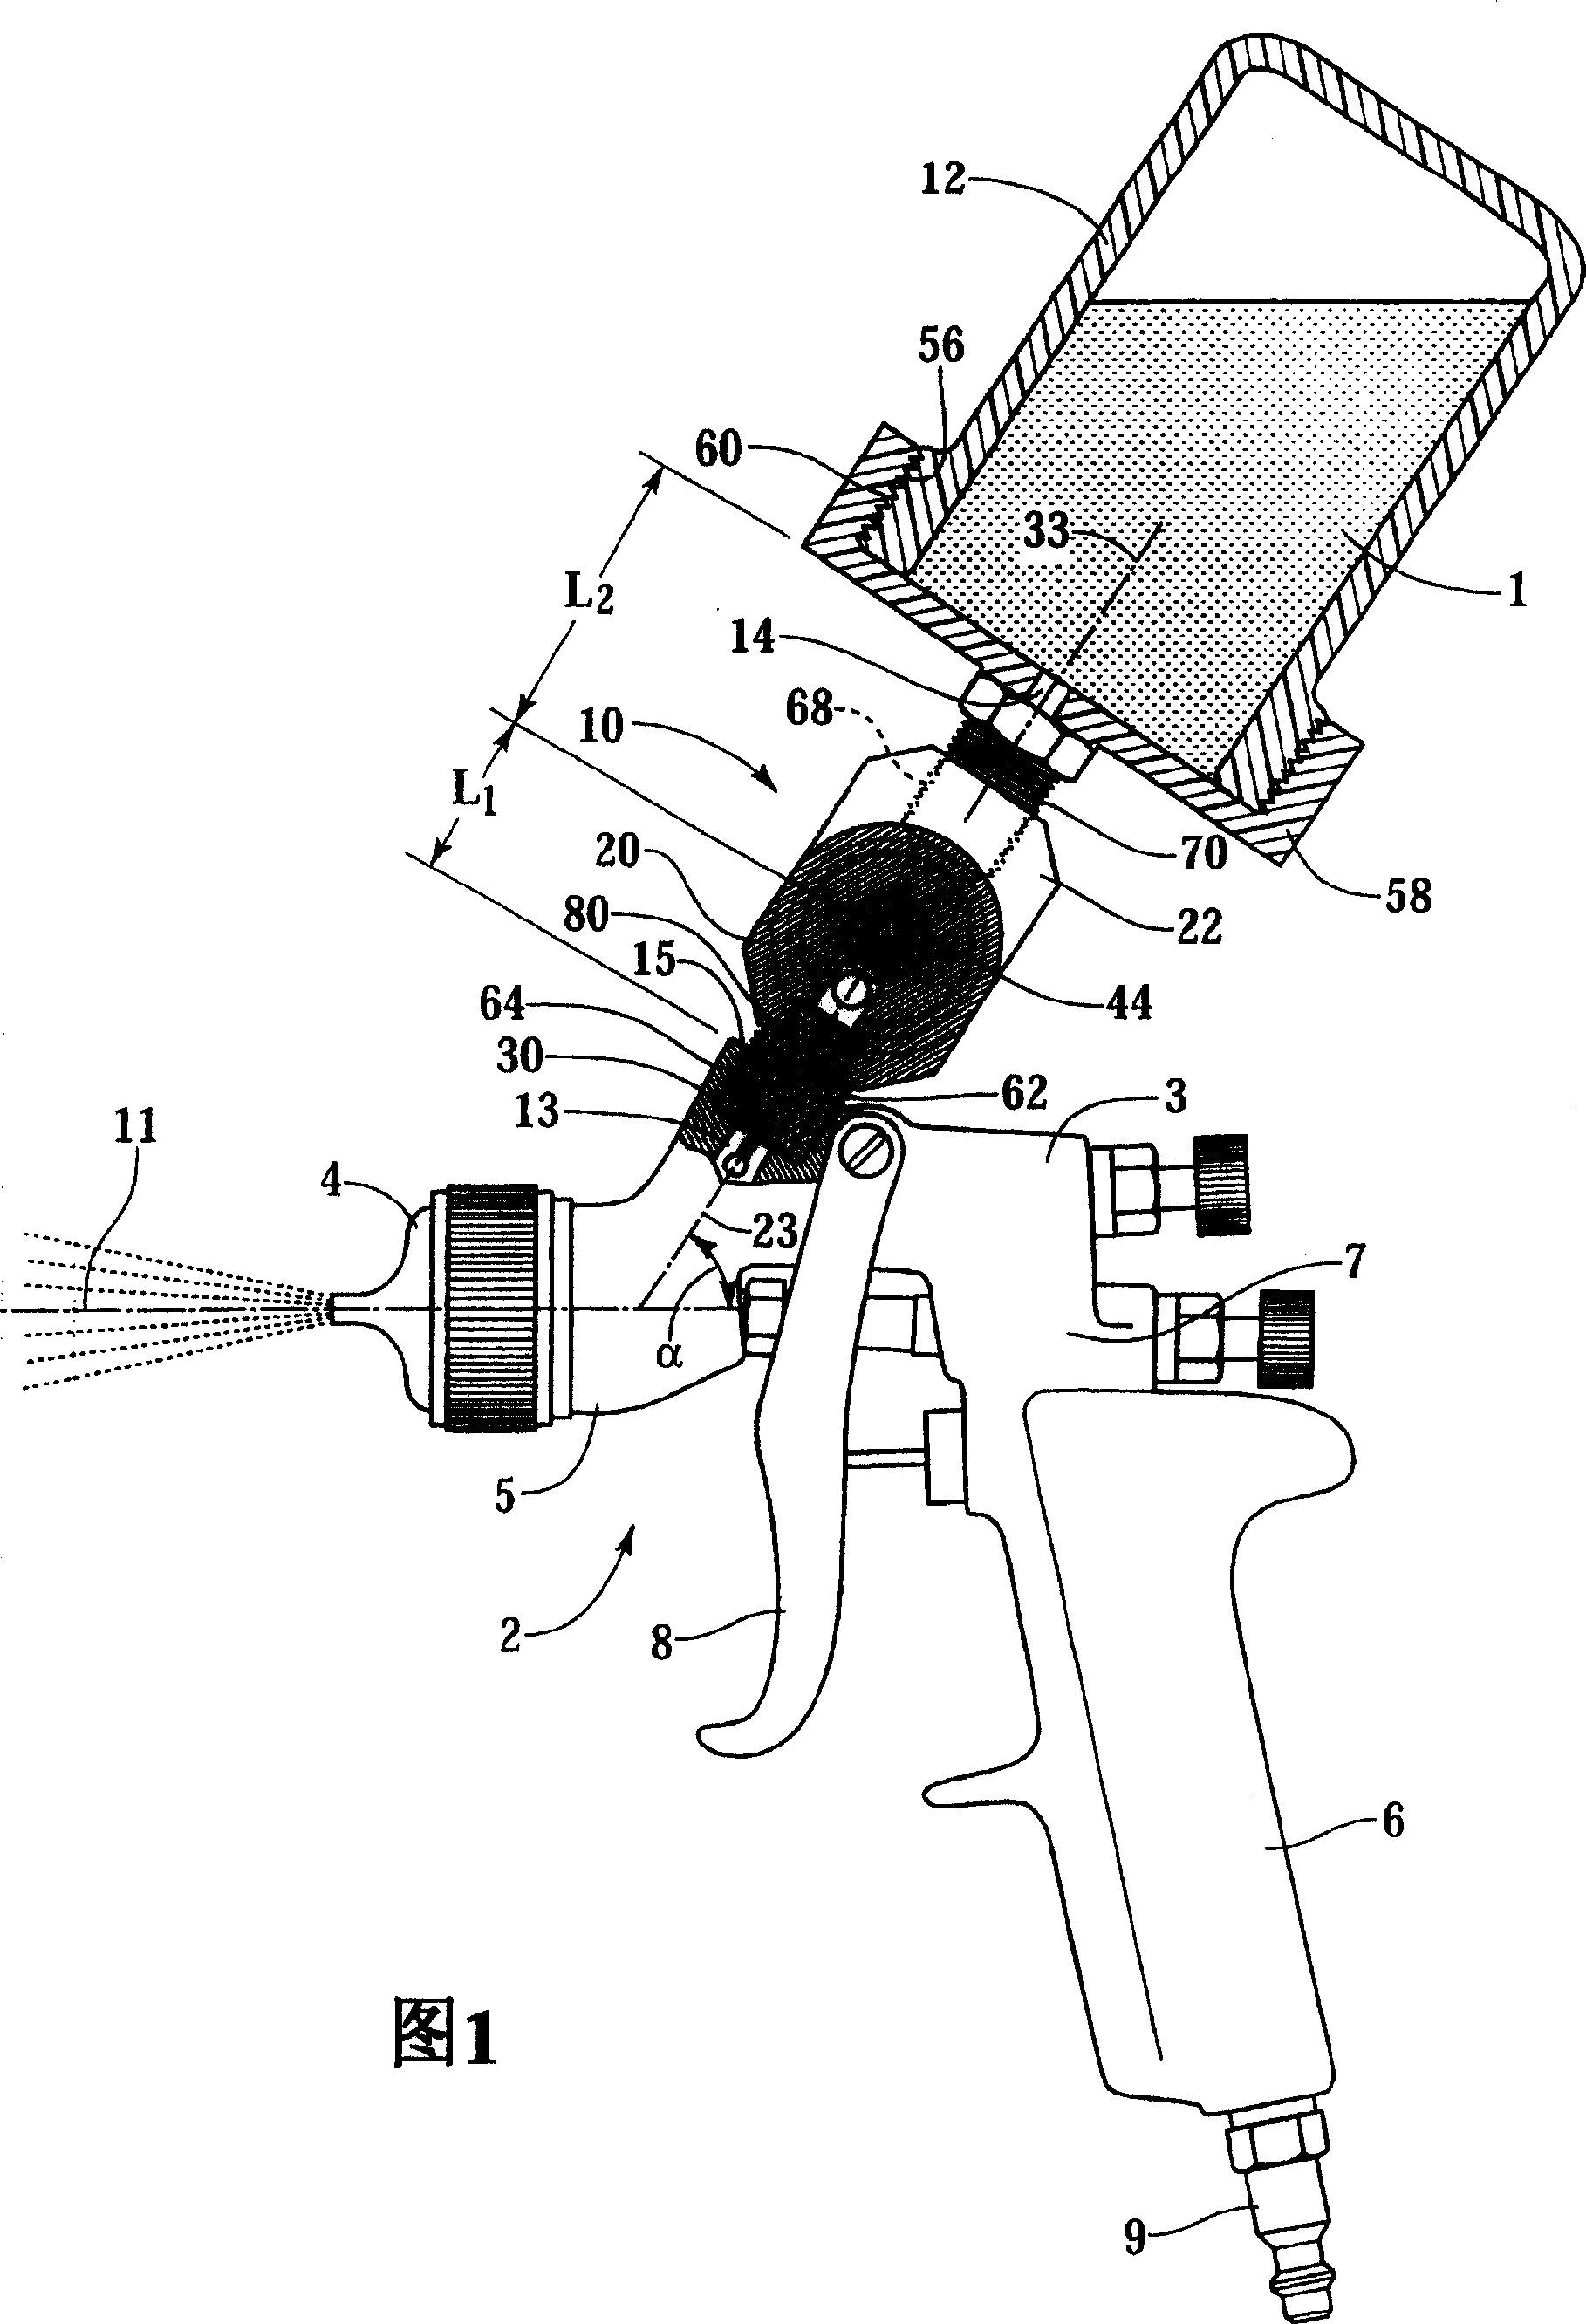 Adjustable adapter for gravity-feed paint sprayer